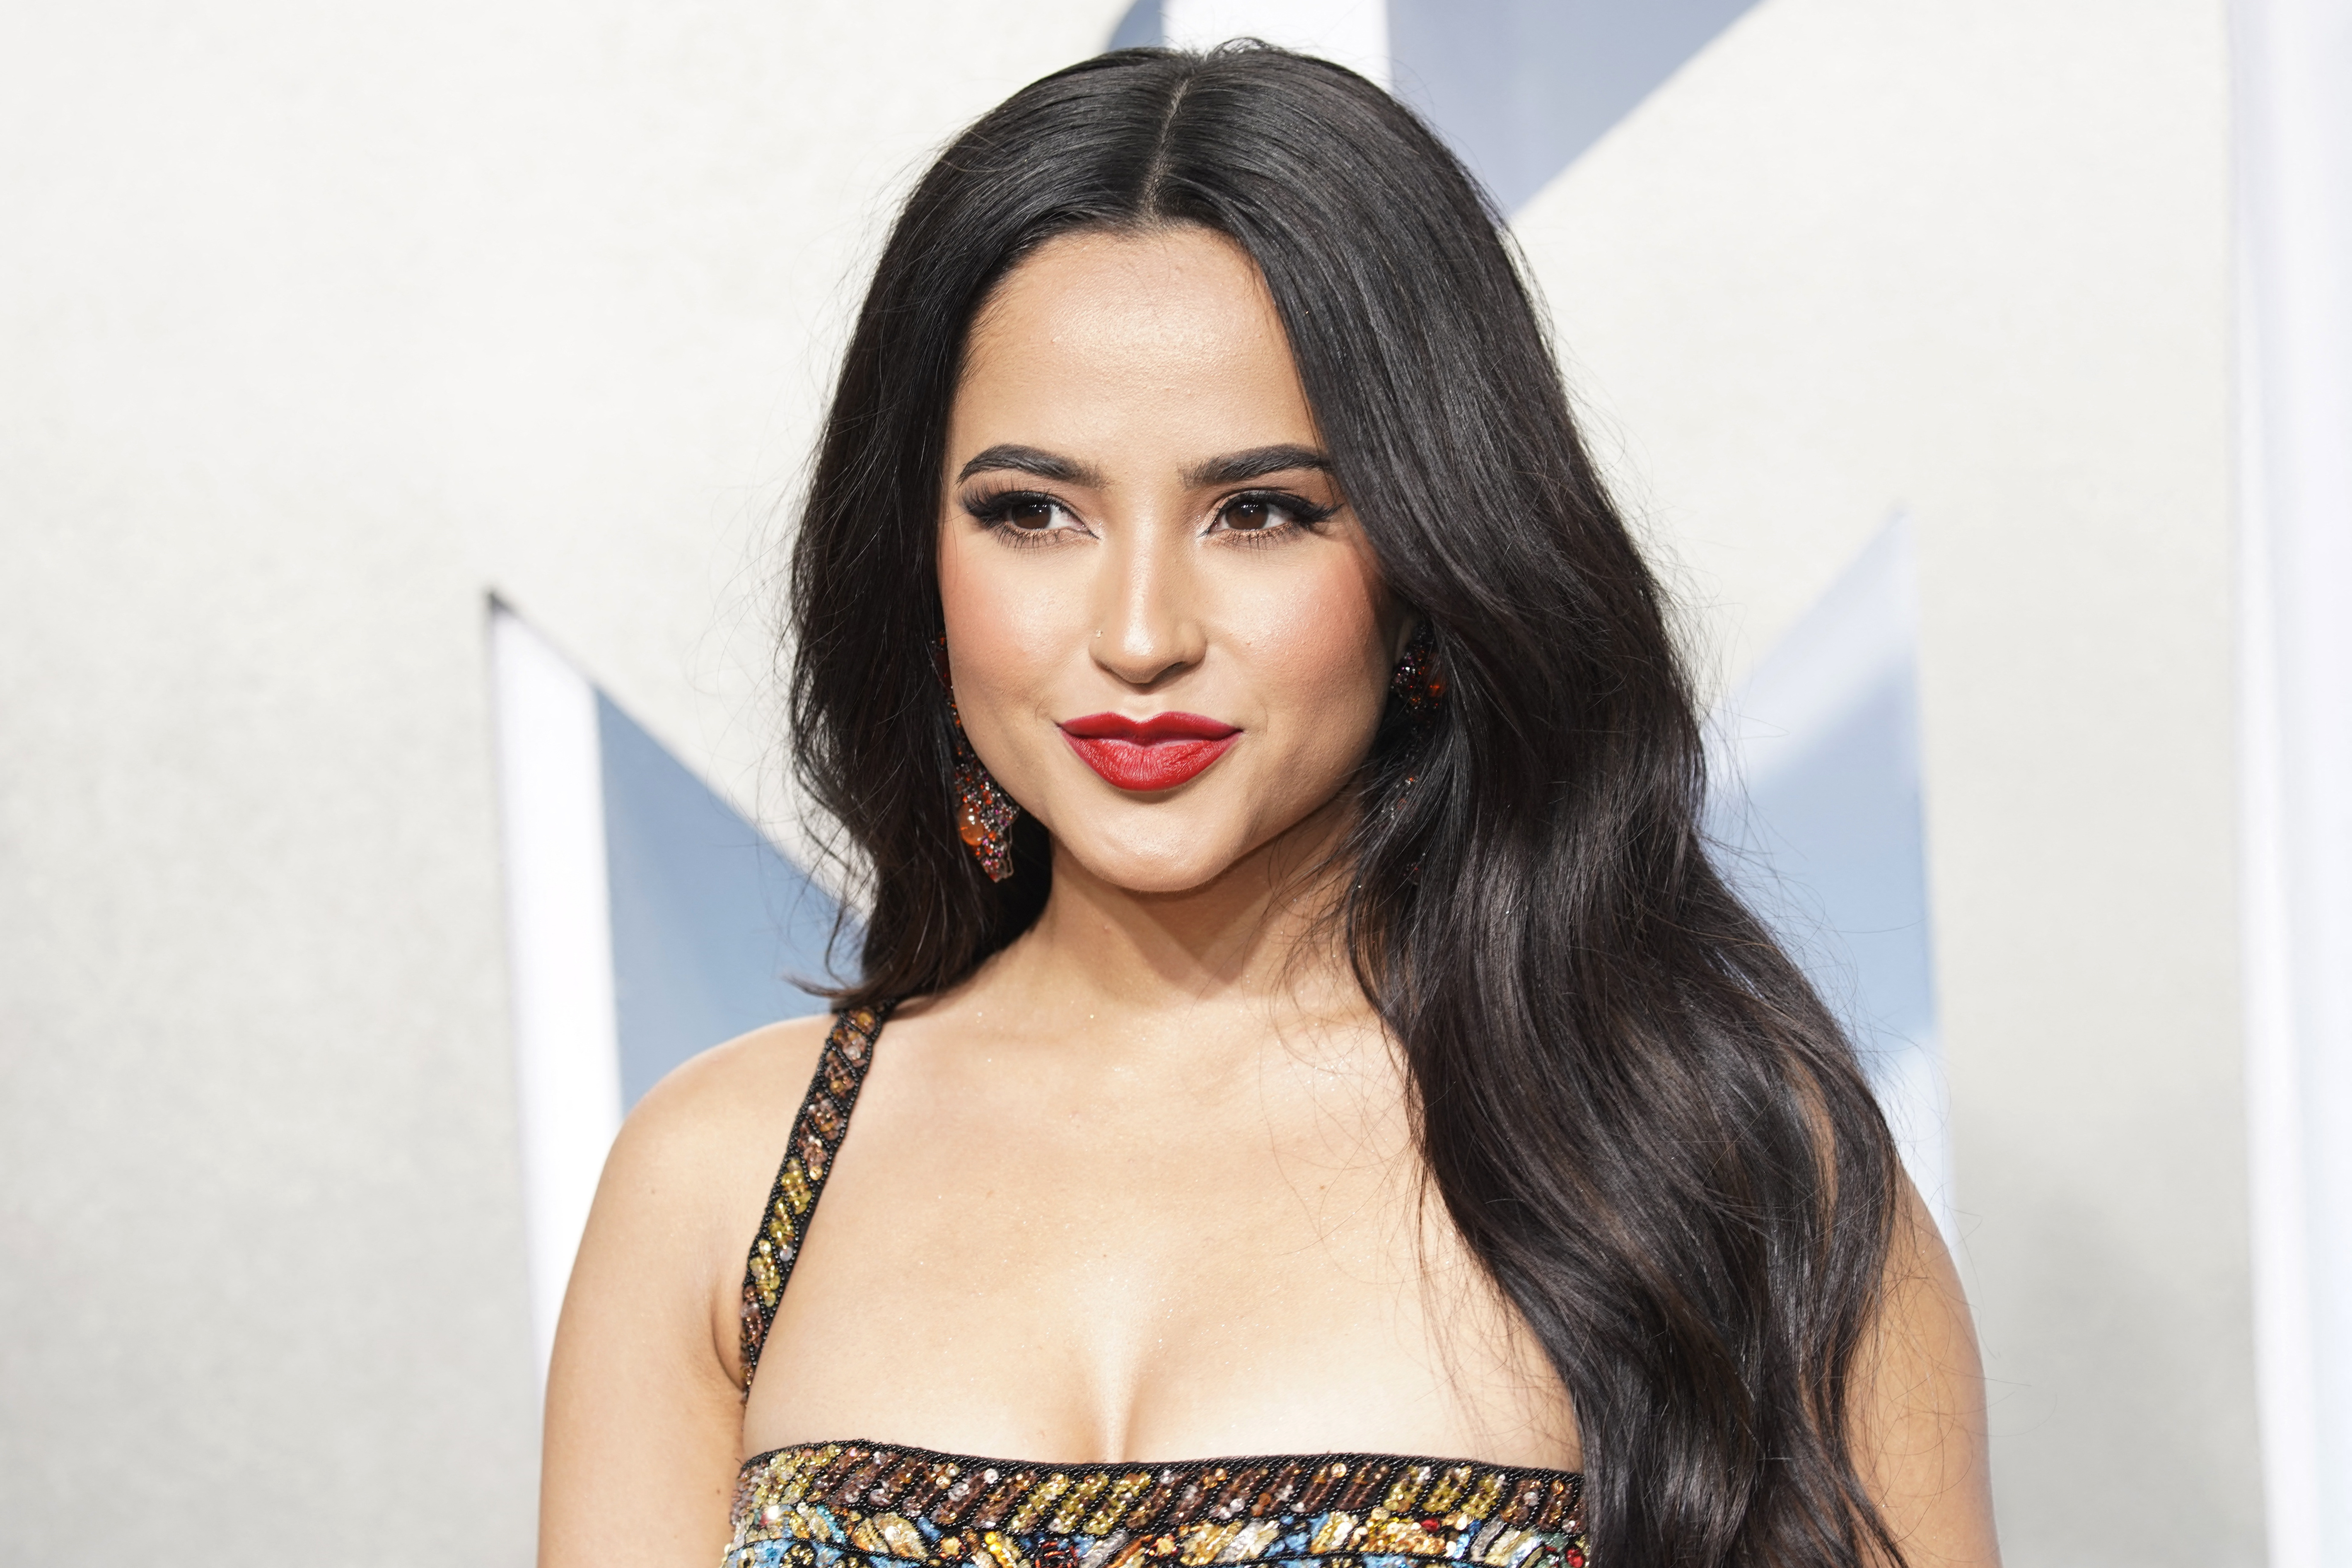 Becky G arrives at the 2022 MTV Video Music Awards at the Prudential Center in Newark, New Jersey, U.S., August 28, 2022. REUTERS/Eduardo Munoz